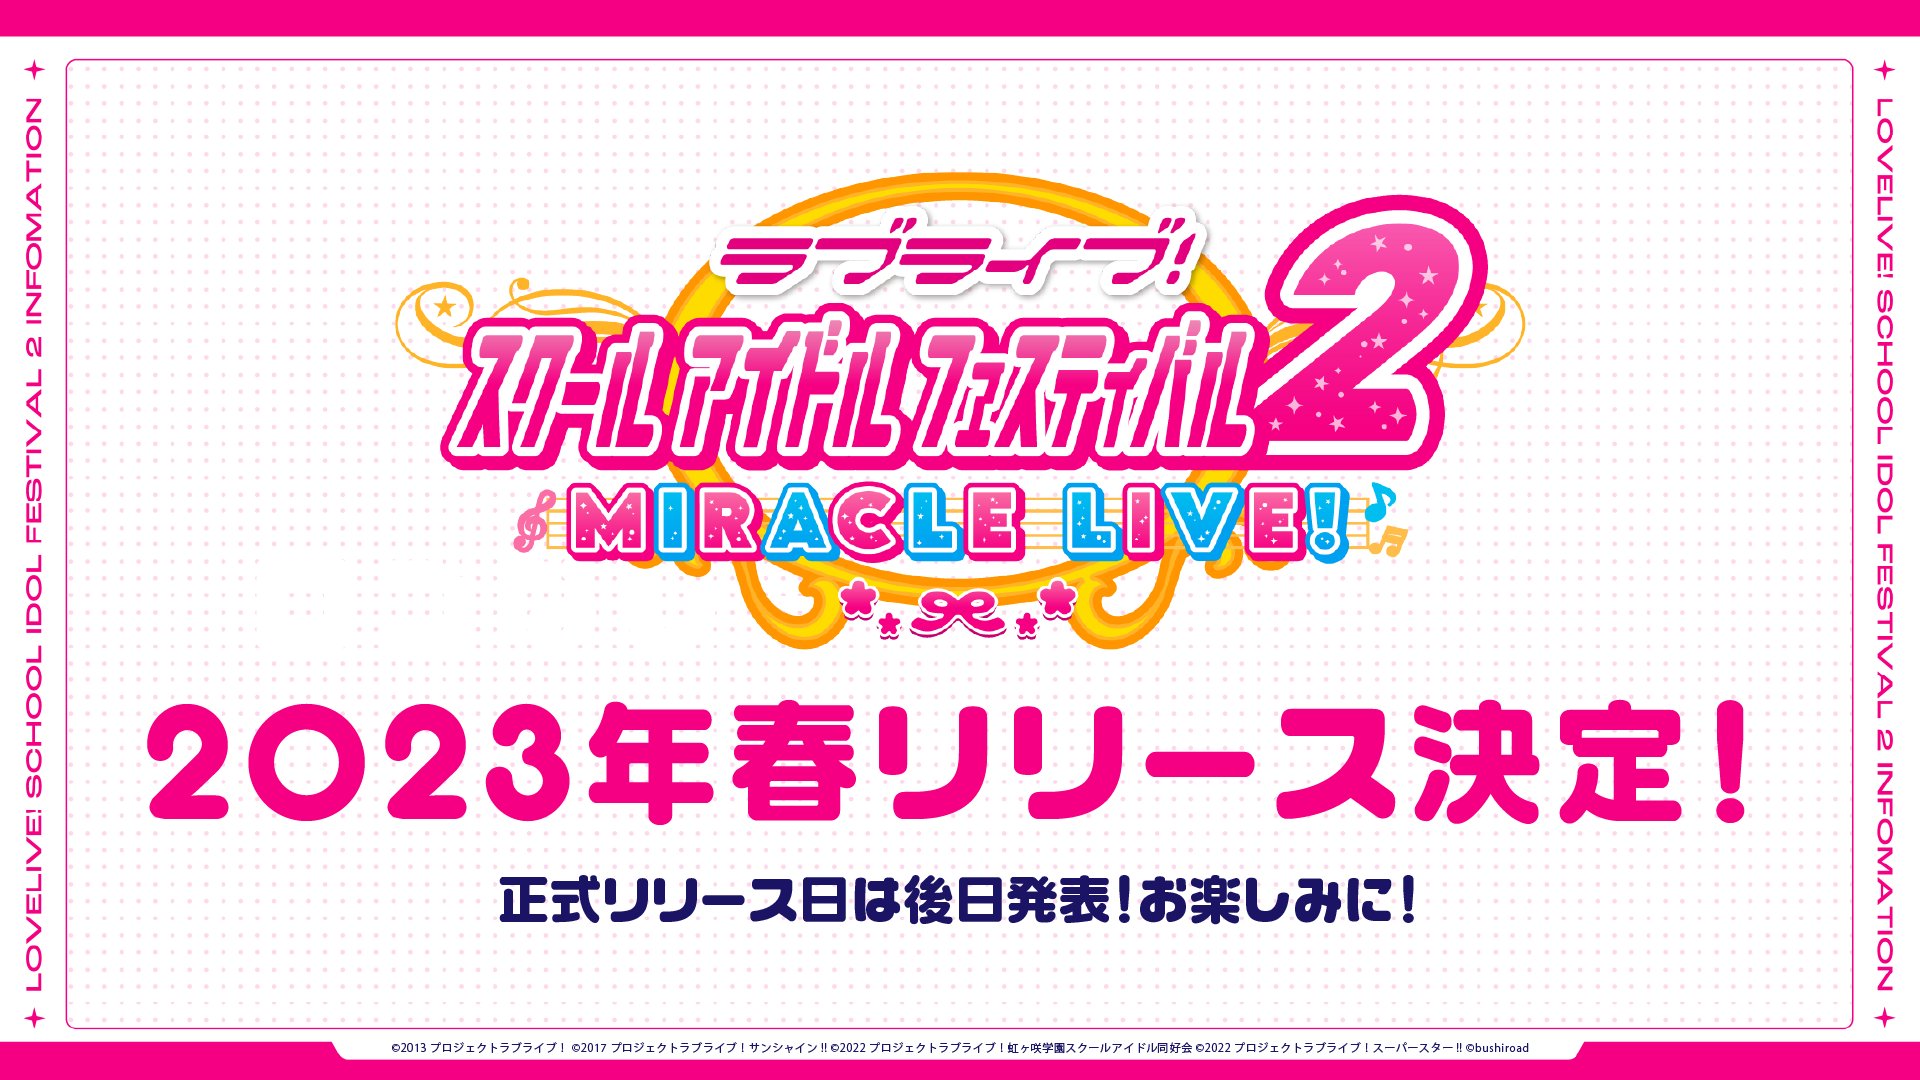 Love Live! School Idol Festival 2 Miracle Live! Mobile Game to Launch in Spring 2023